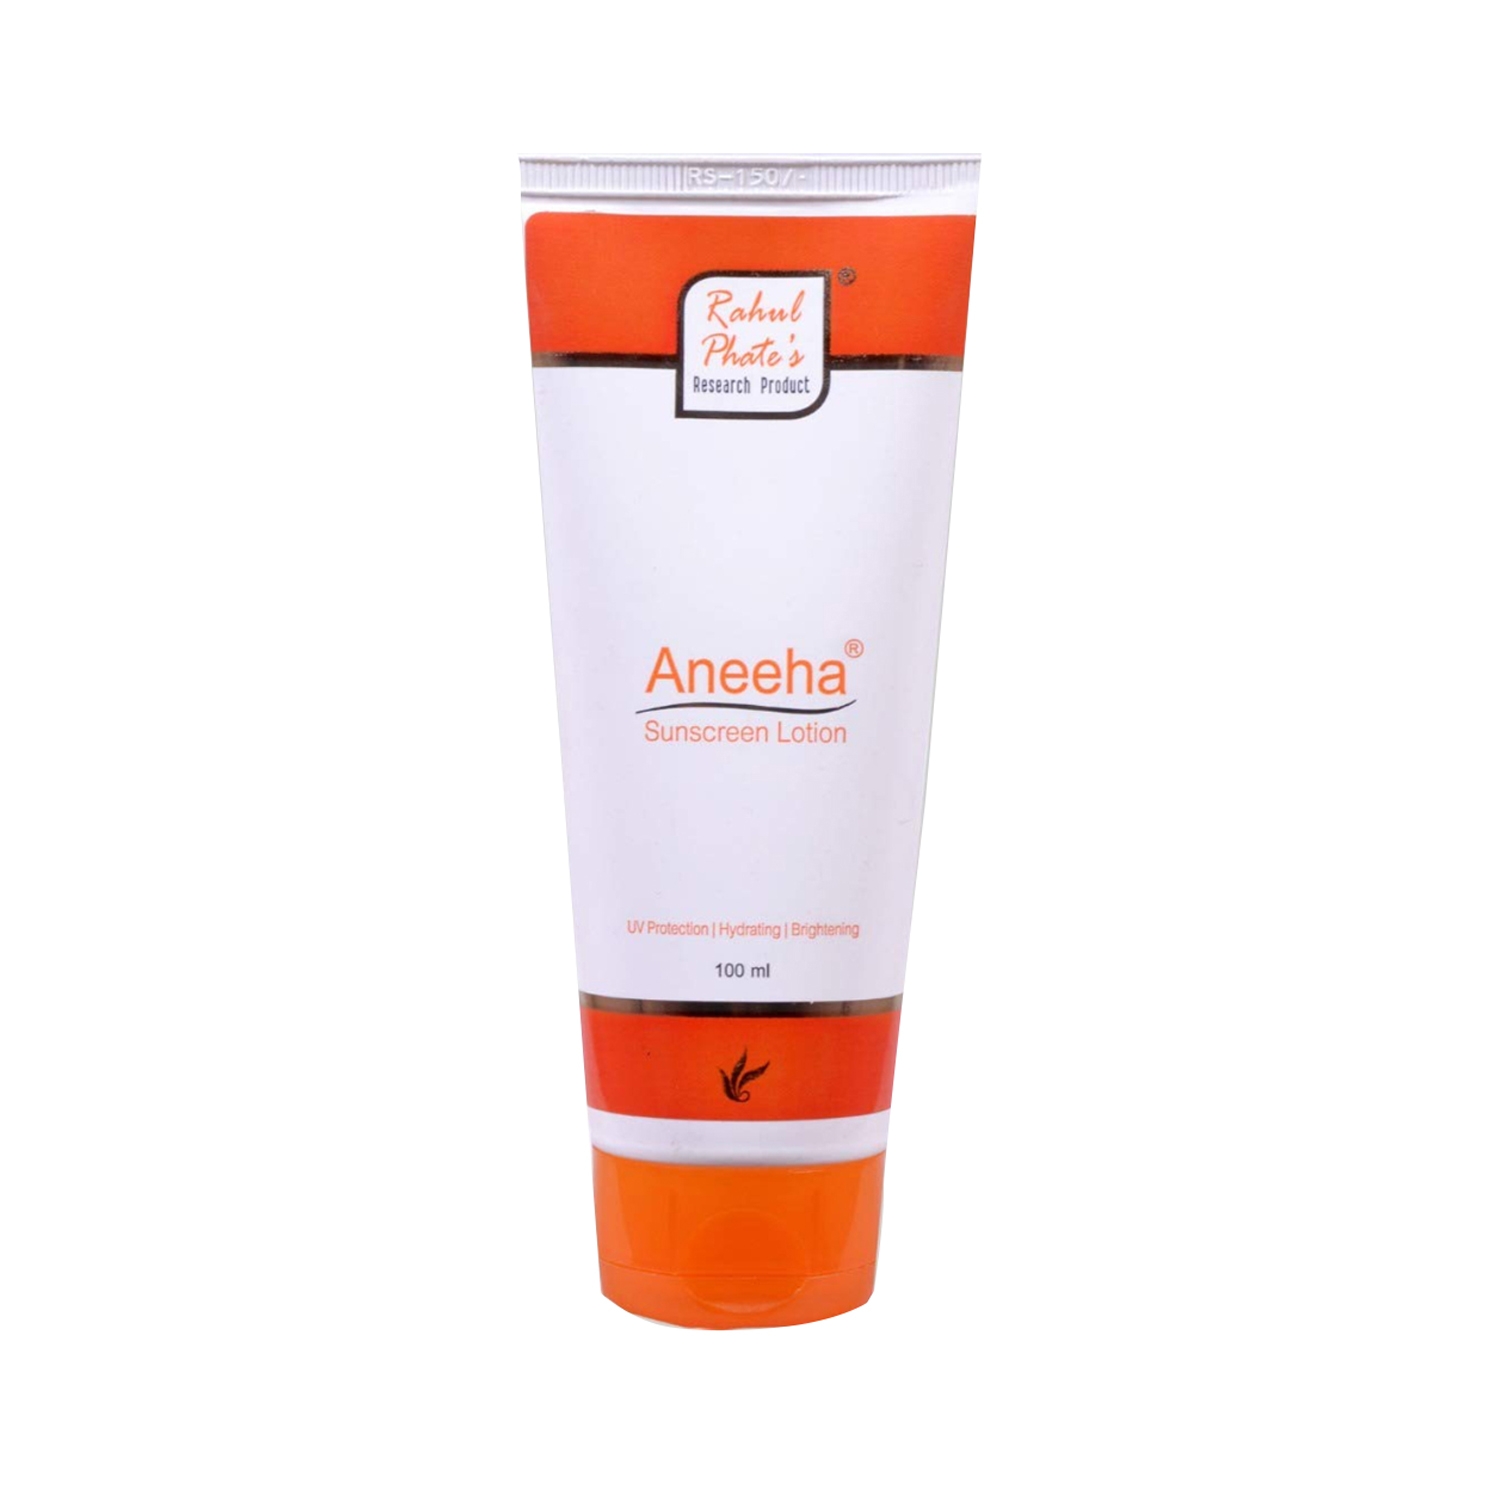 Rahul Phate's Research Product | Rahul Phate's Research Product Aneeha Sunscreen Lotion (100ml)